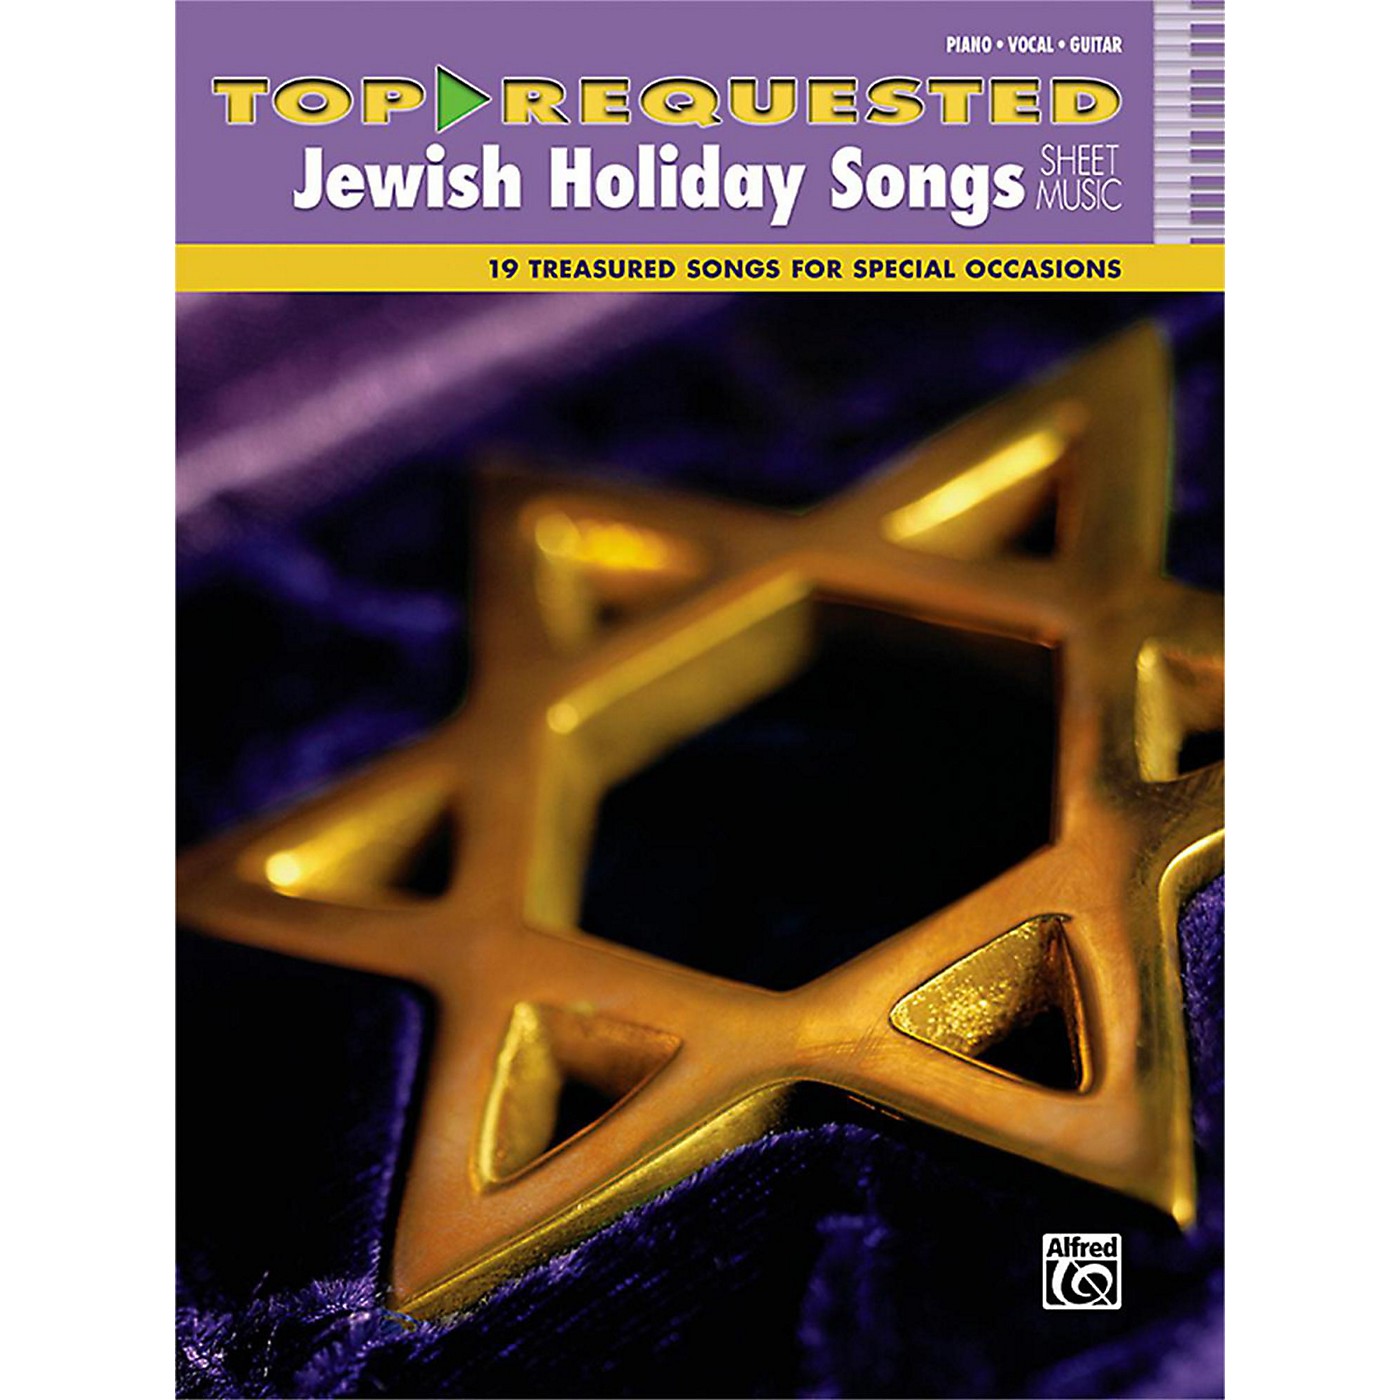 Alfred Top-Requested Jewish Holiday Songs Sheet Music Piano/Vocal/Guitar Book thumbnail